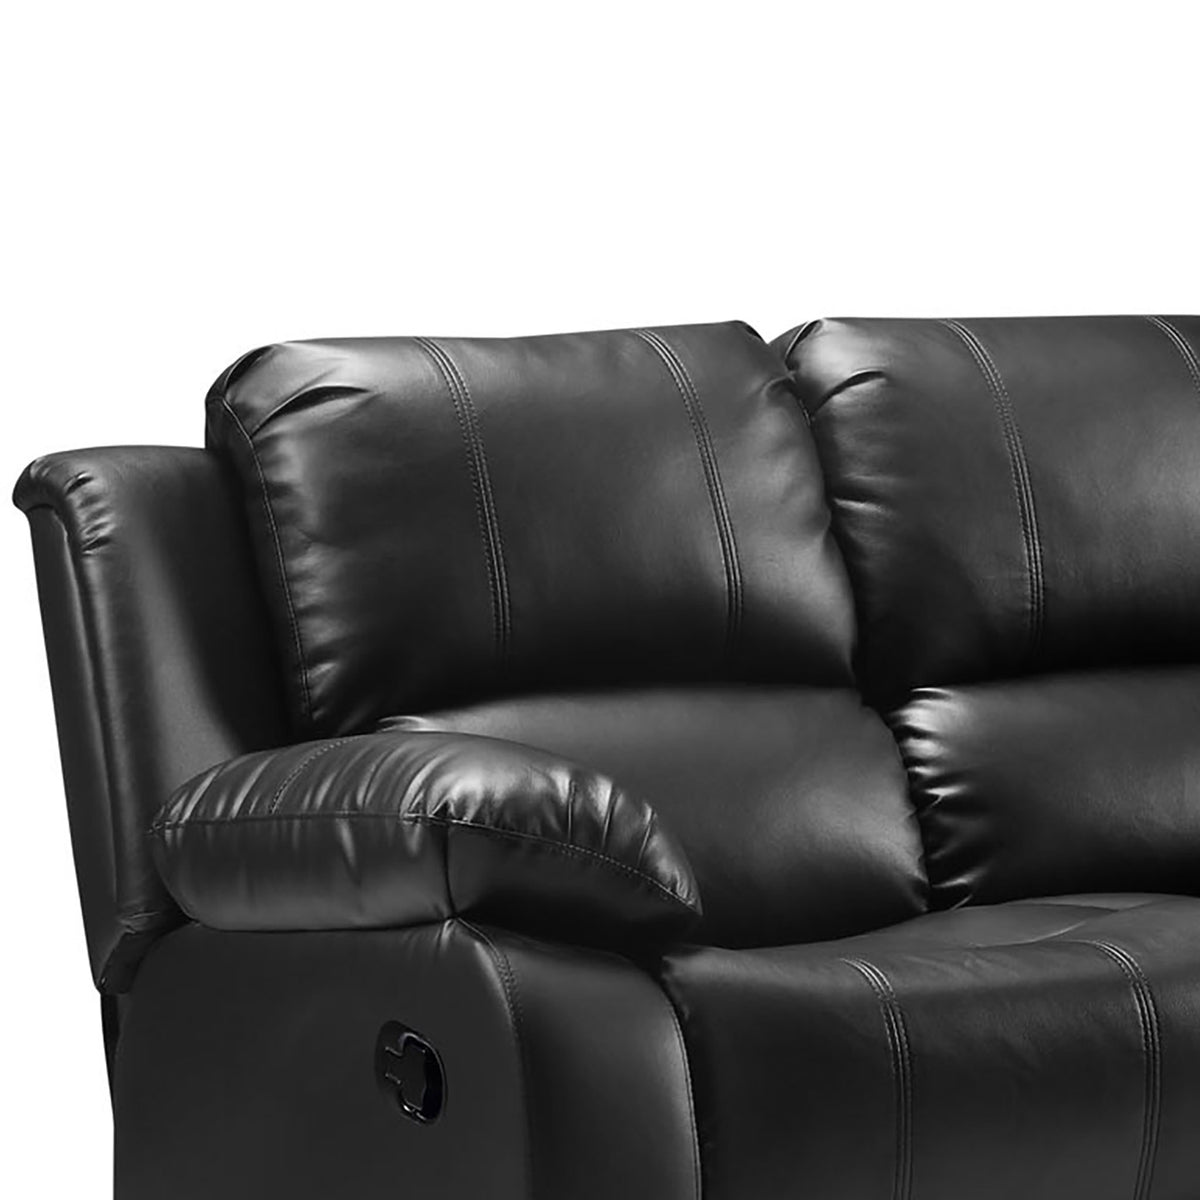 Valencia Black 2 Seater Reclining Air Leather Sofa - Close up of back